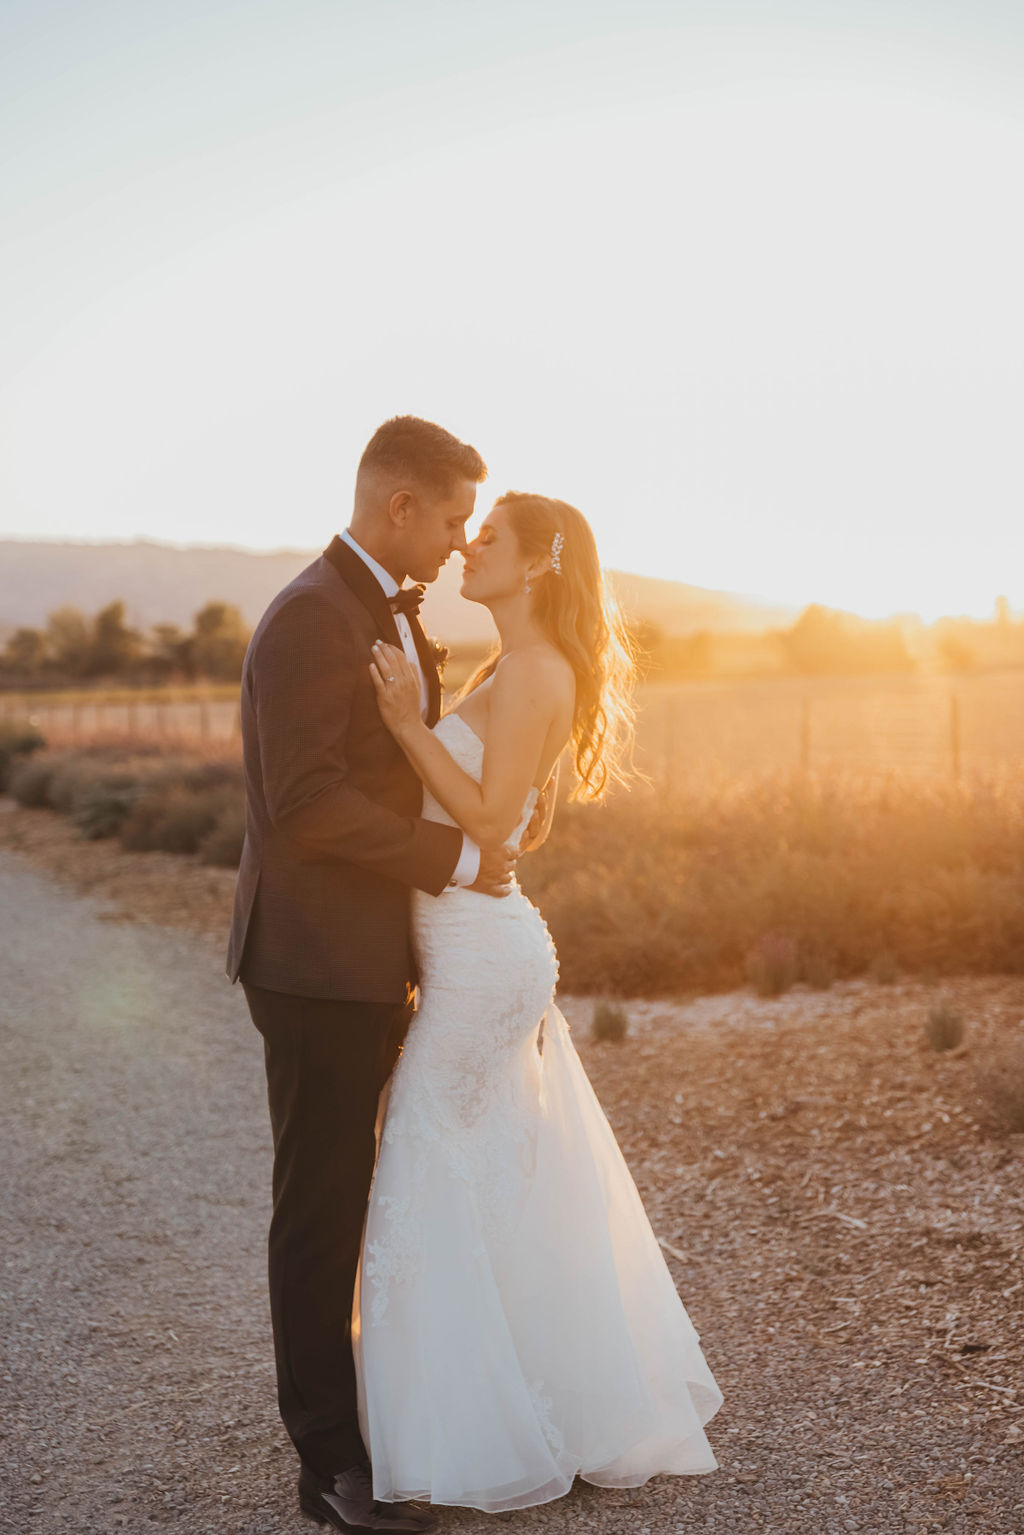 A bride and groom share a tender moment, kissing on a sunlit path, with a serene countryside landscape in the background at their intimate wedding